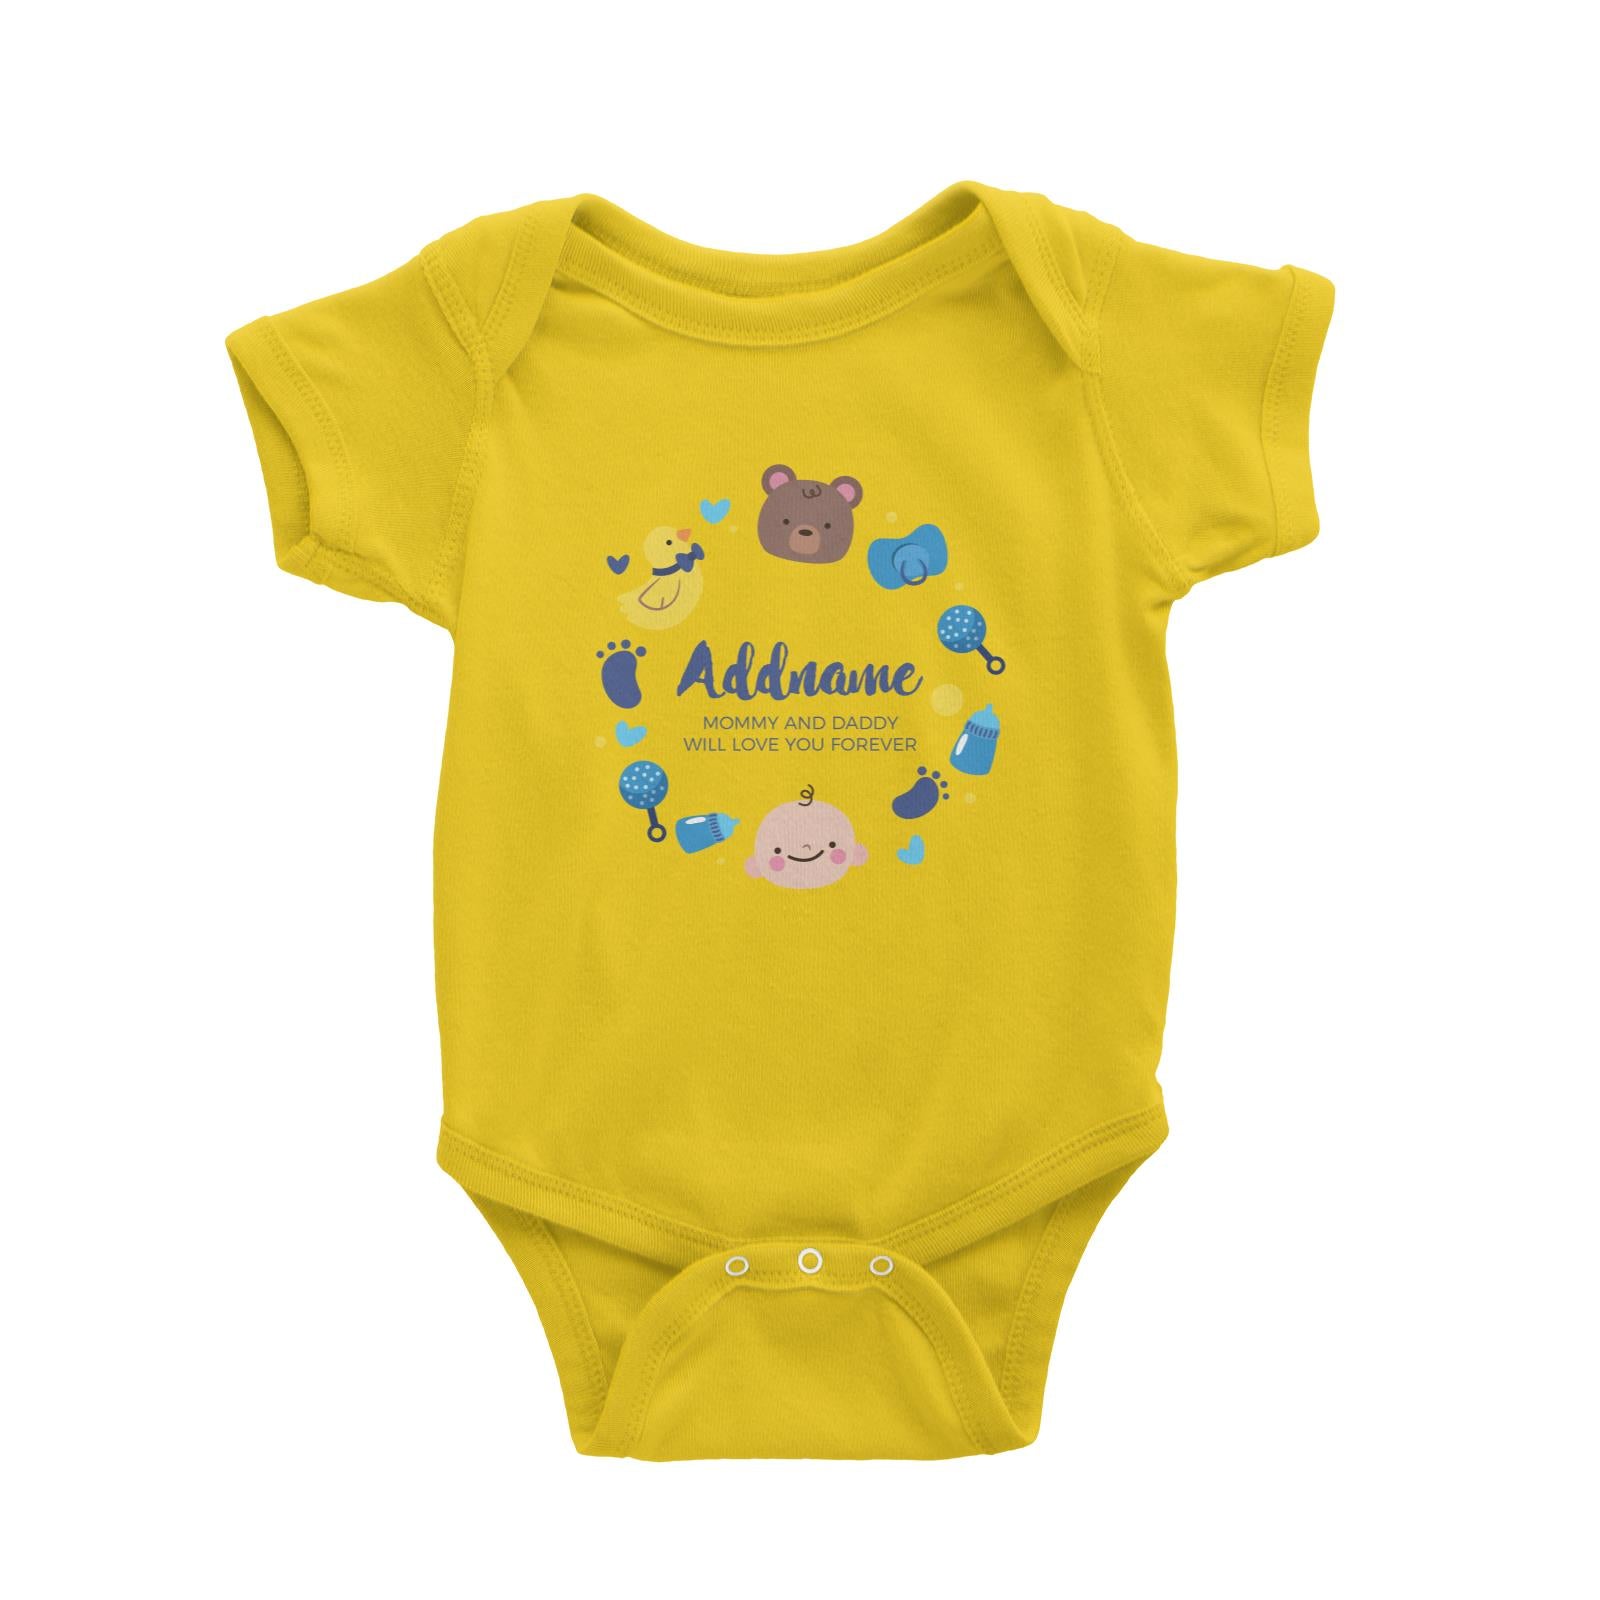 Cute Baby Boy Elements Personalizable with Name and Text Baby Romper